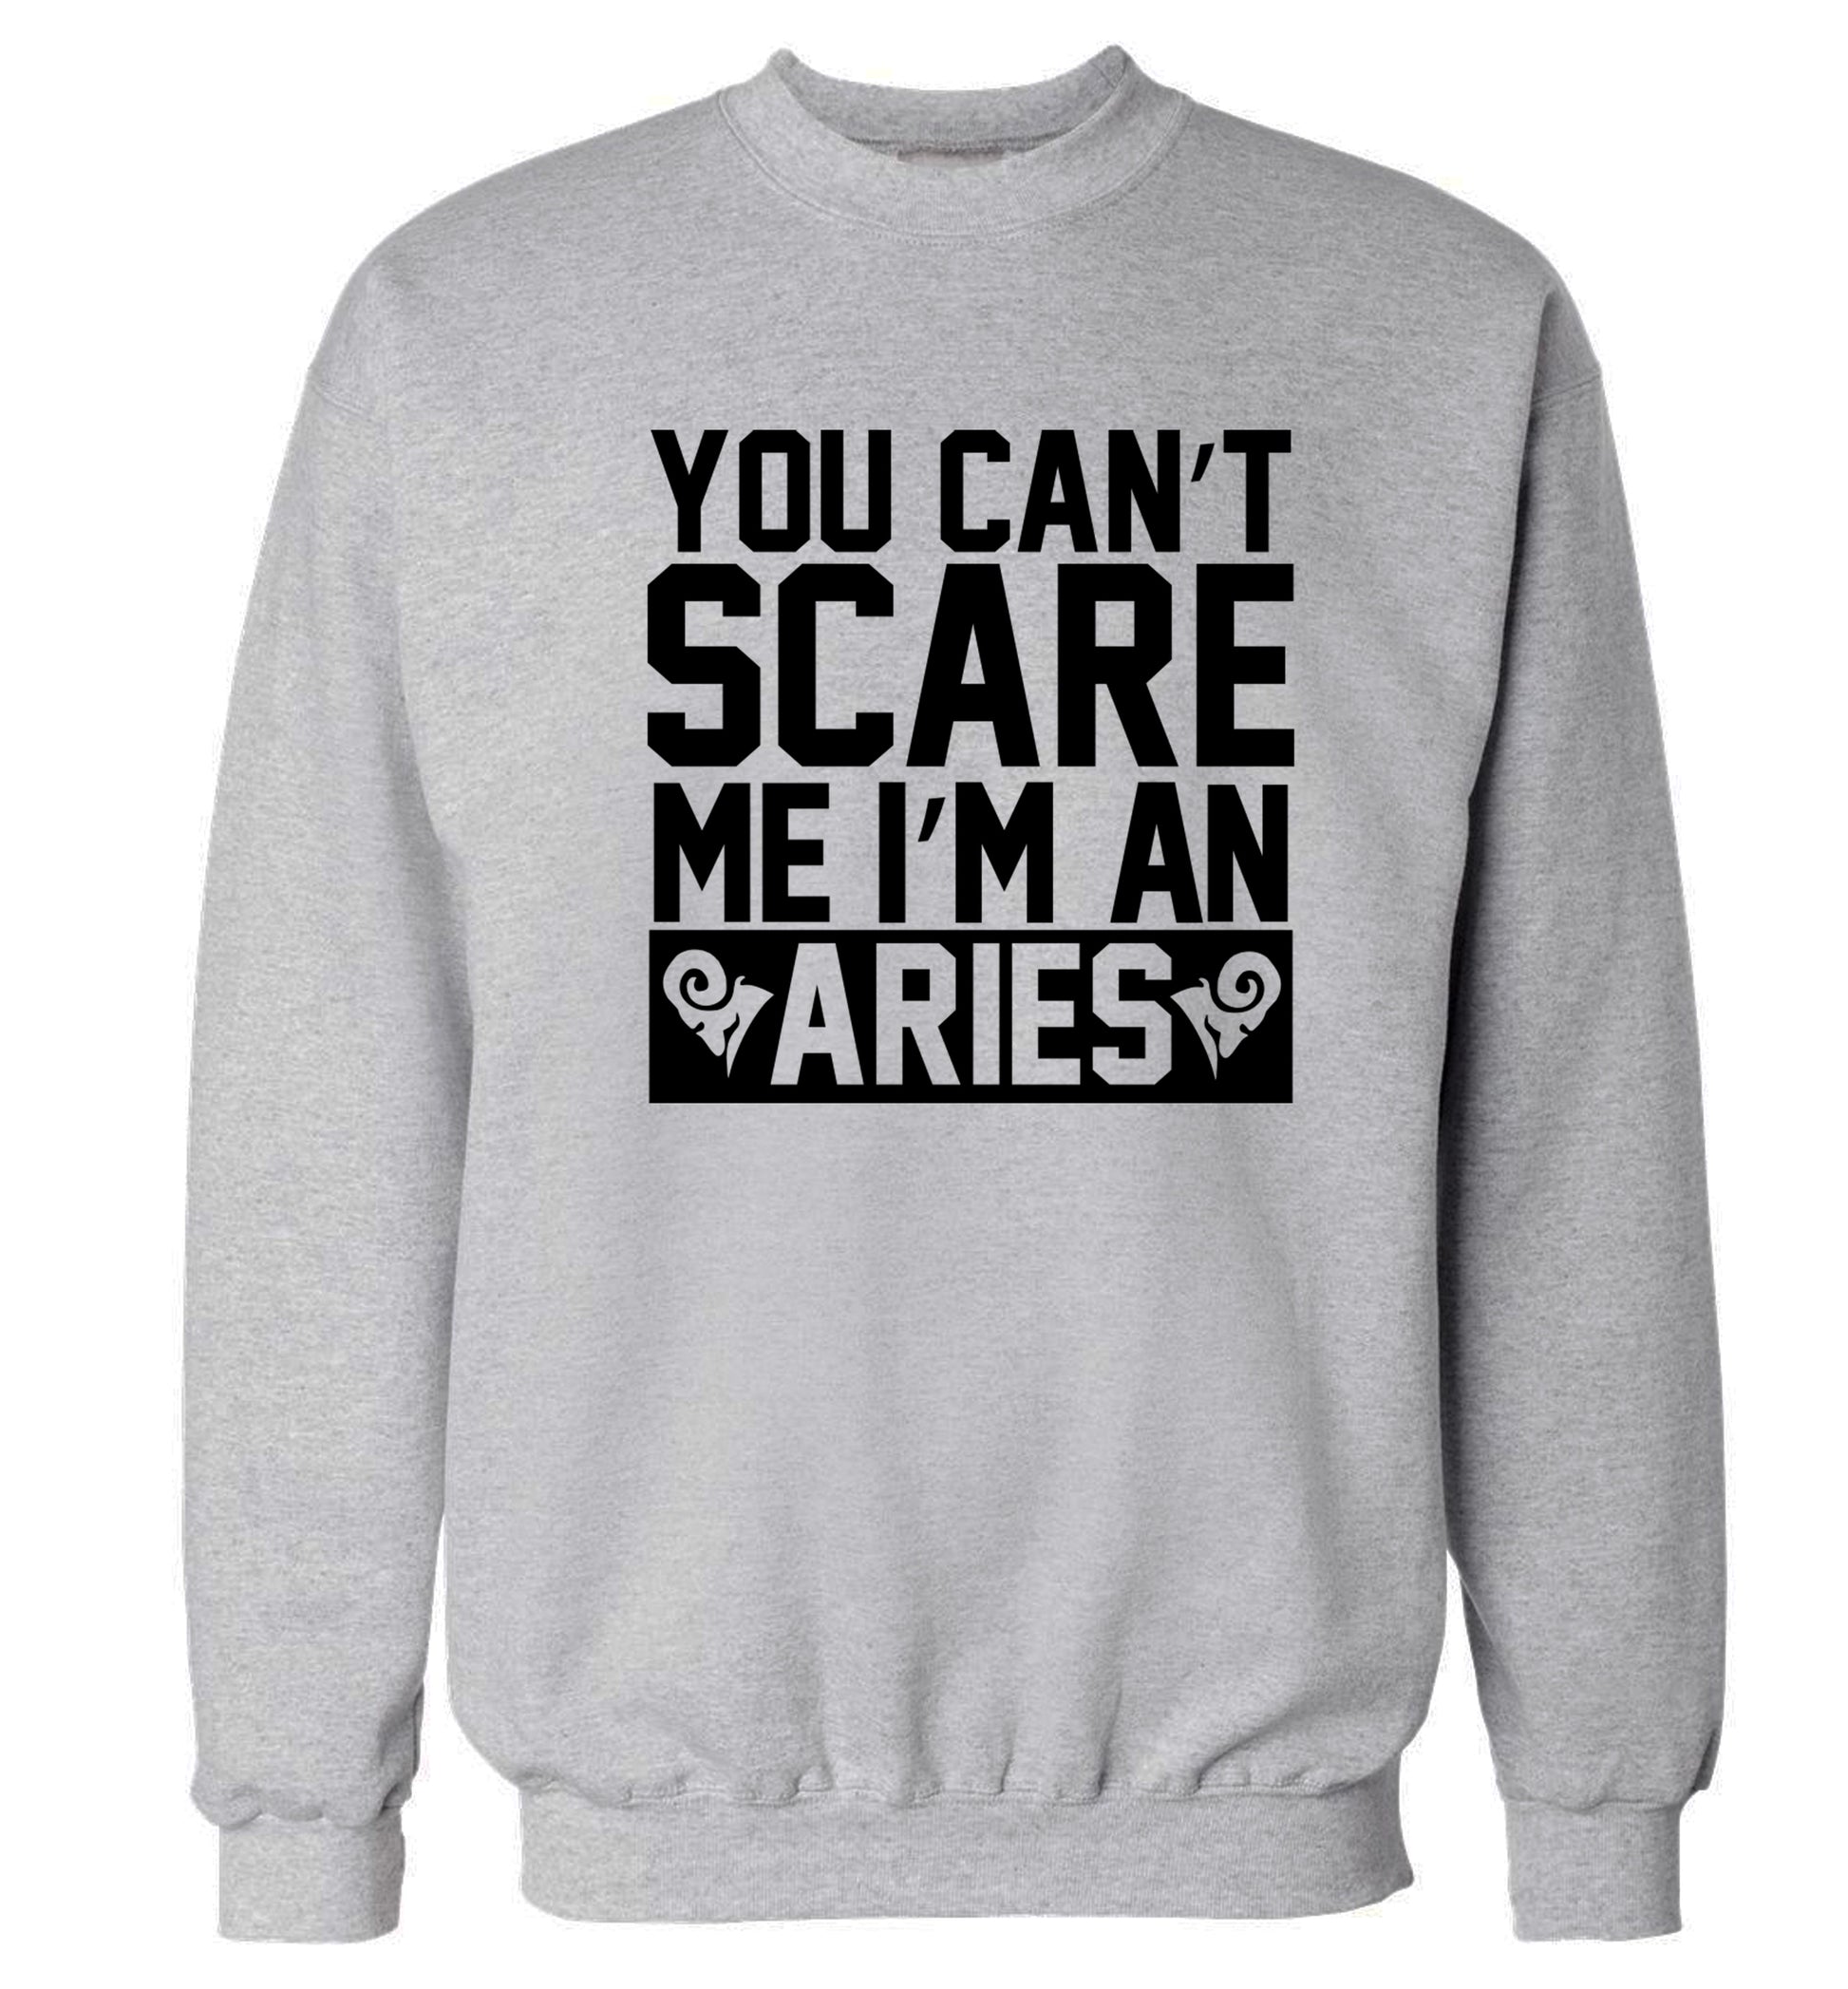 You can't scare me I'm an aries Adult's unisex grey Sweater 2XL